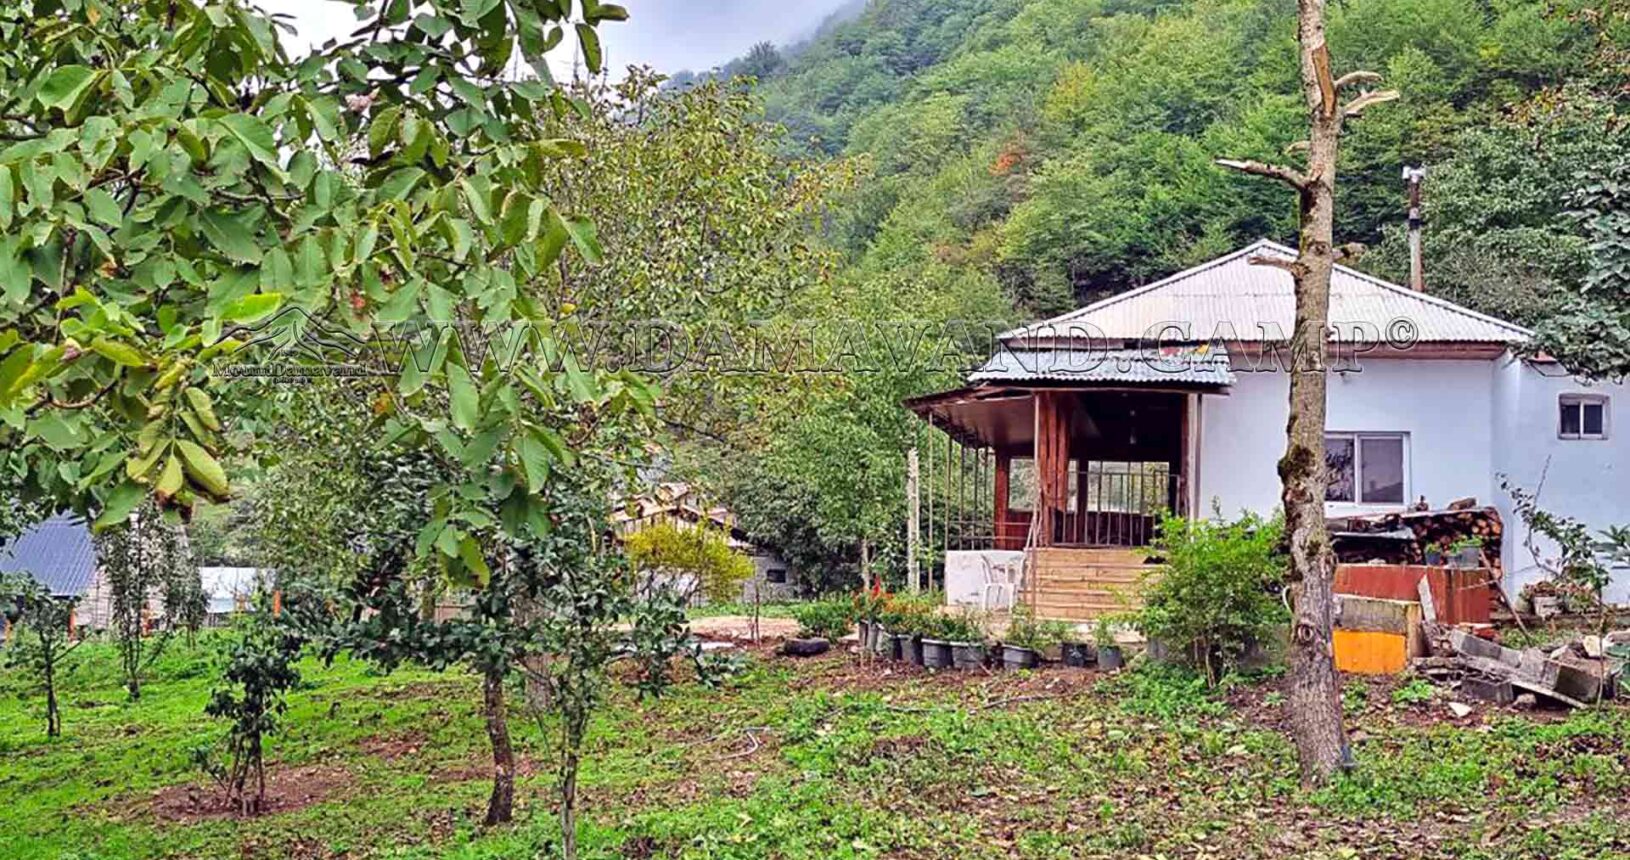 A country house in Alimestan Jungle.